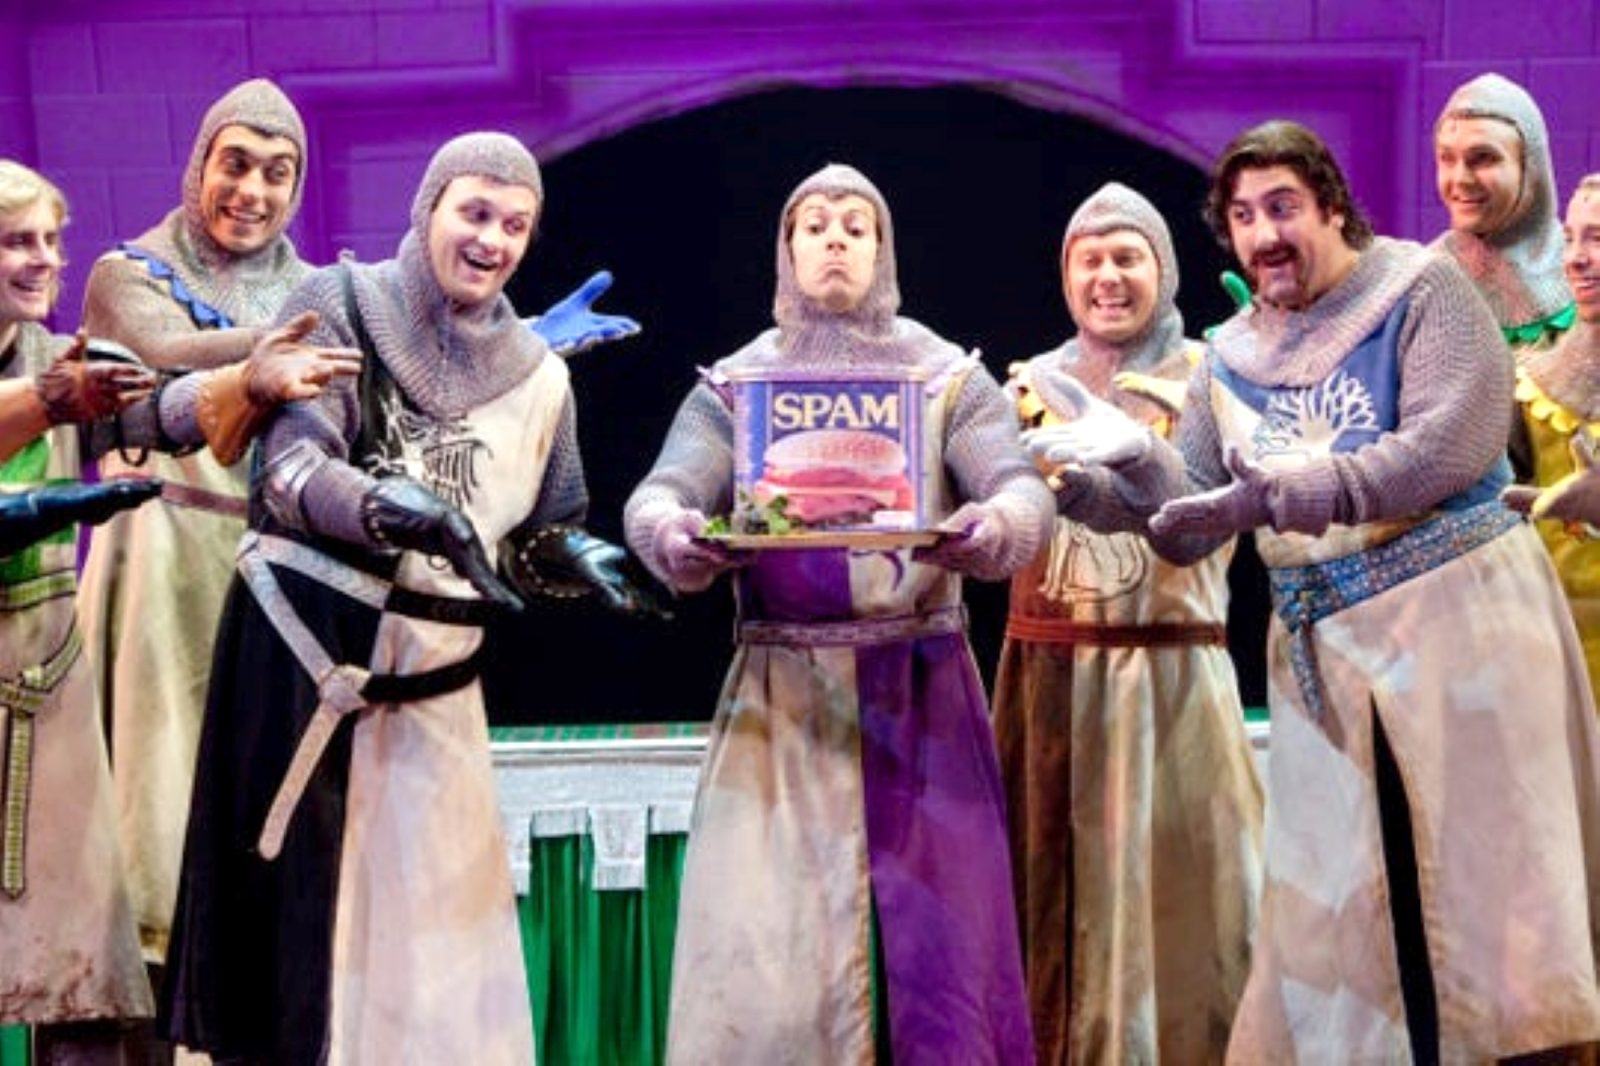 Tally ho! And yoicks away! It’s time for Spamalot